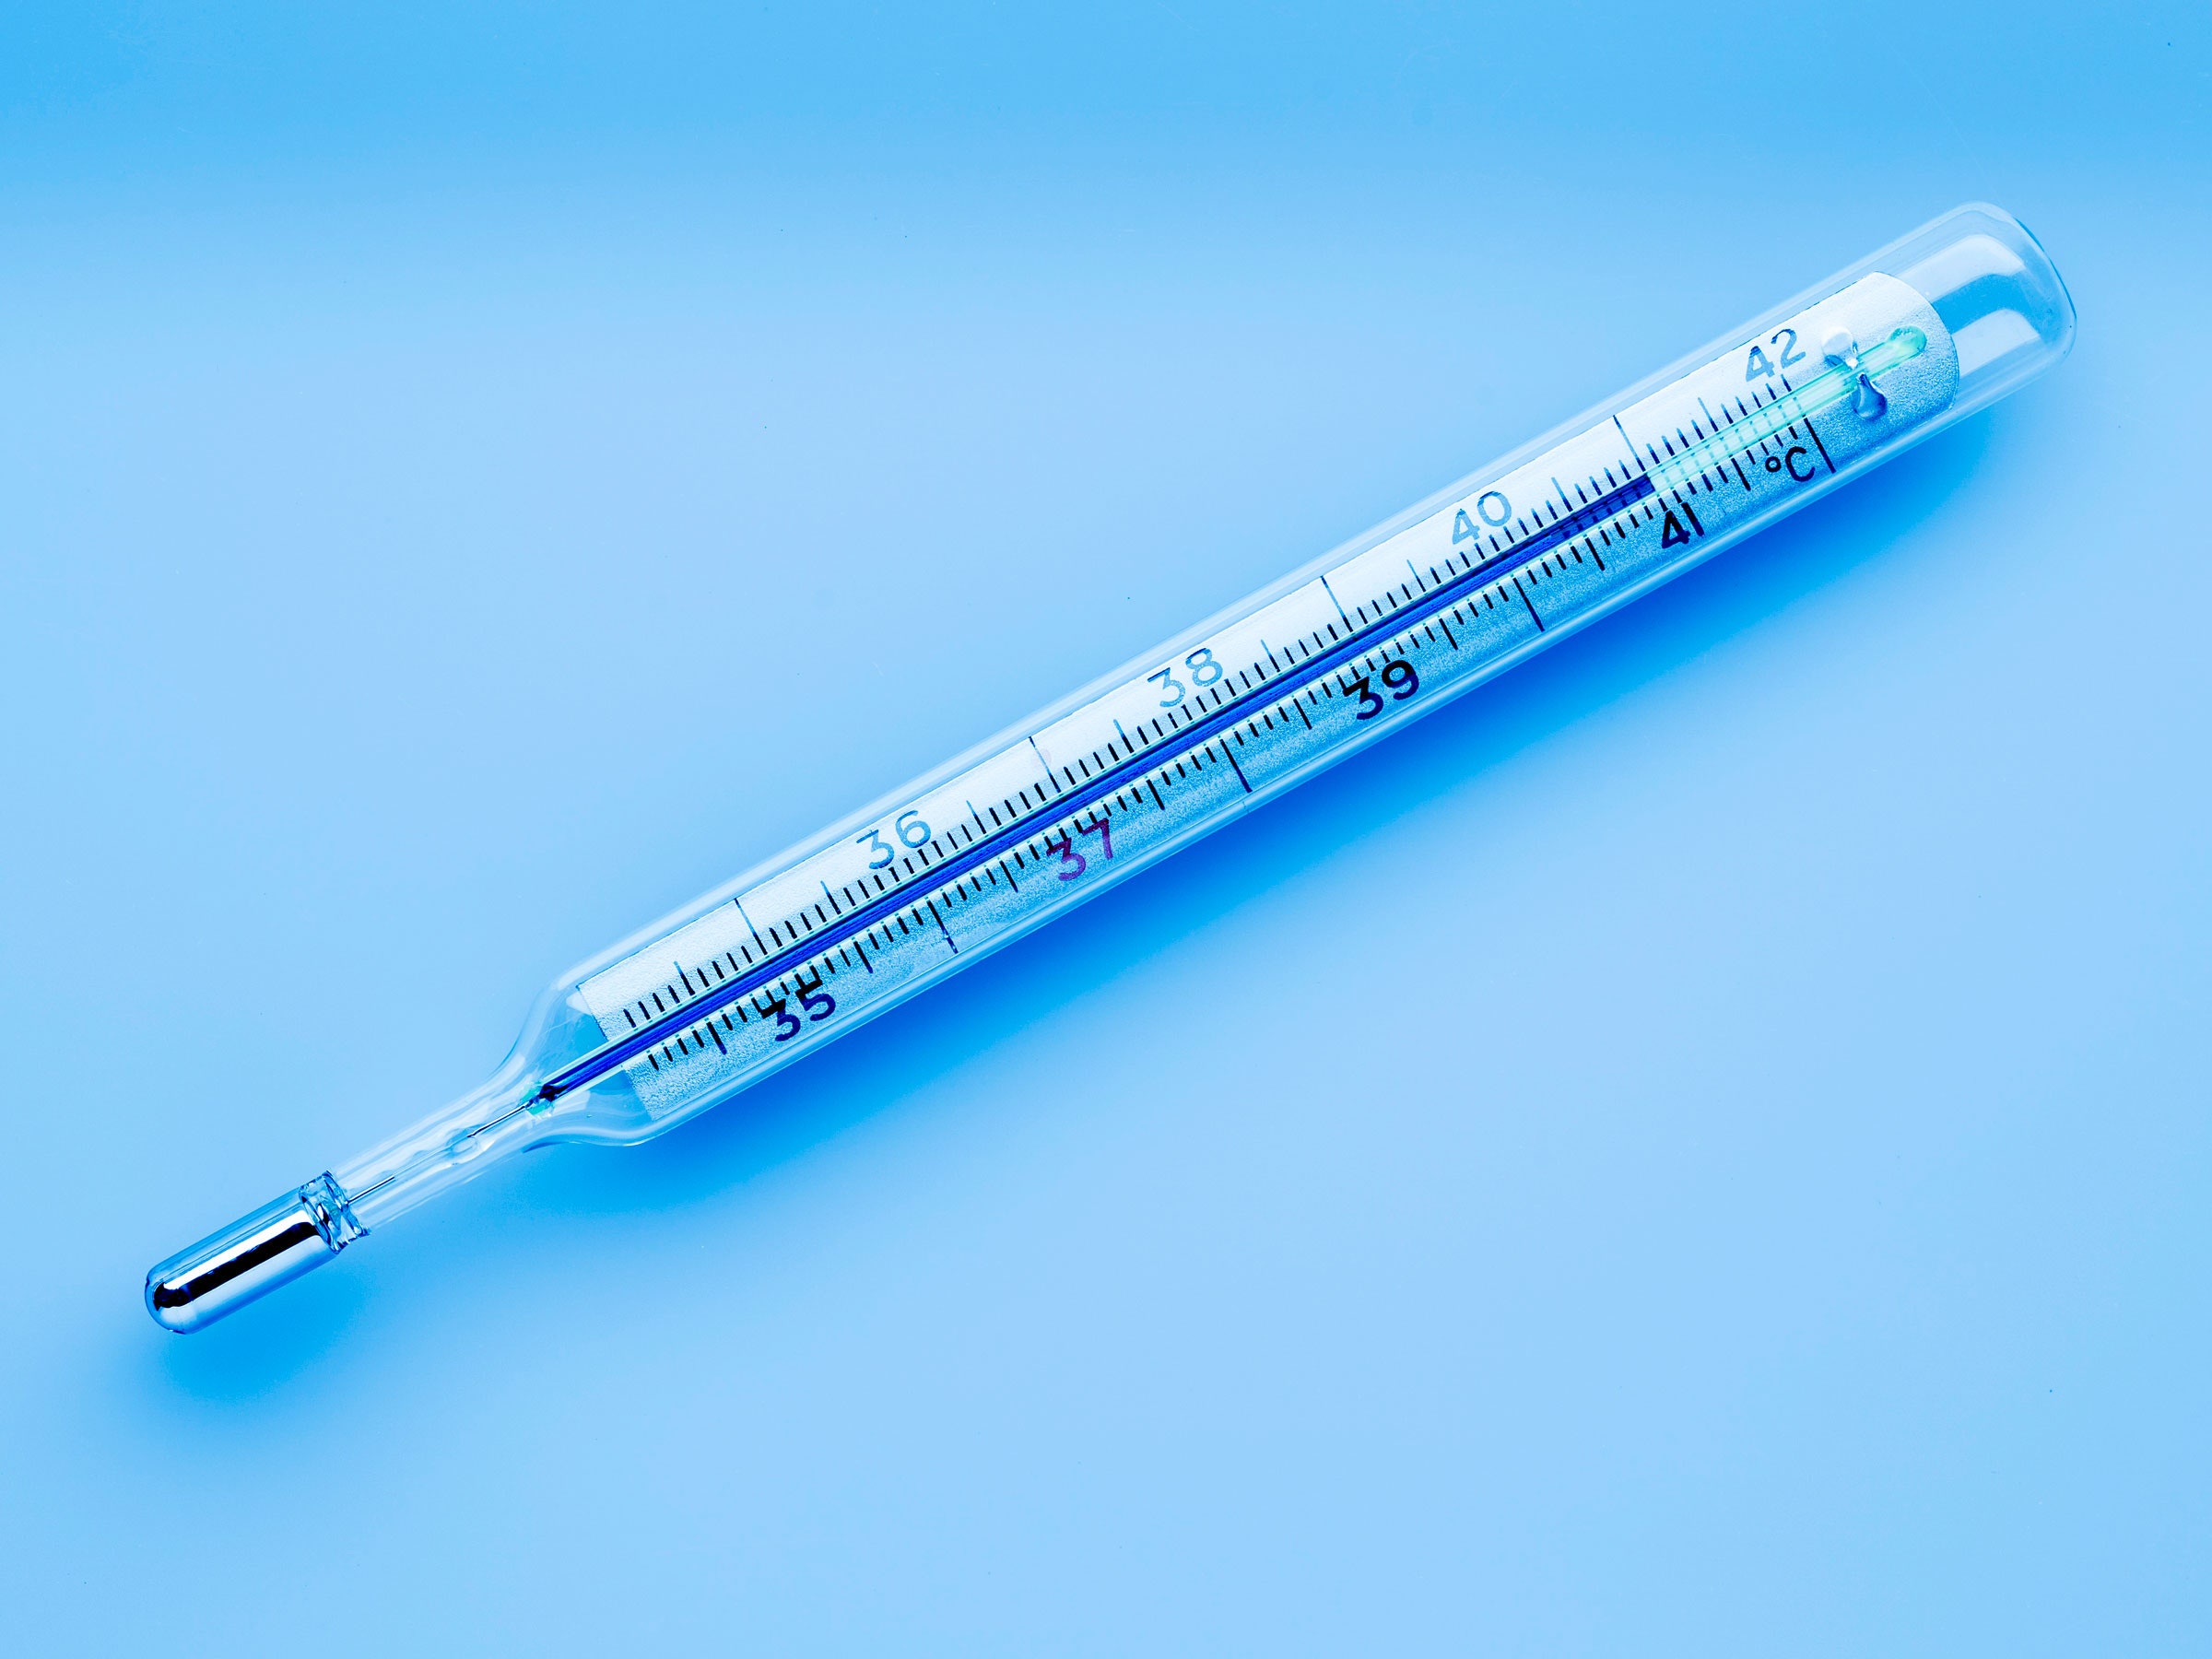 temperature wallpaper,medical equipment,hypodermic needle,thermometer,medical thermometer,service